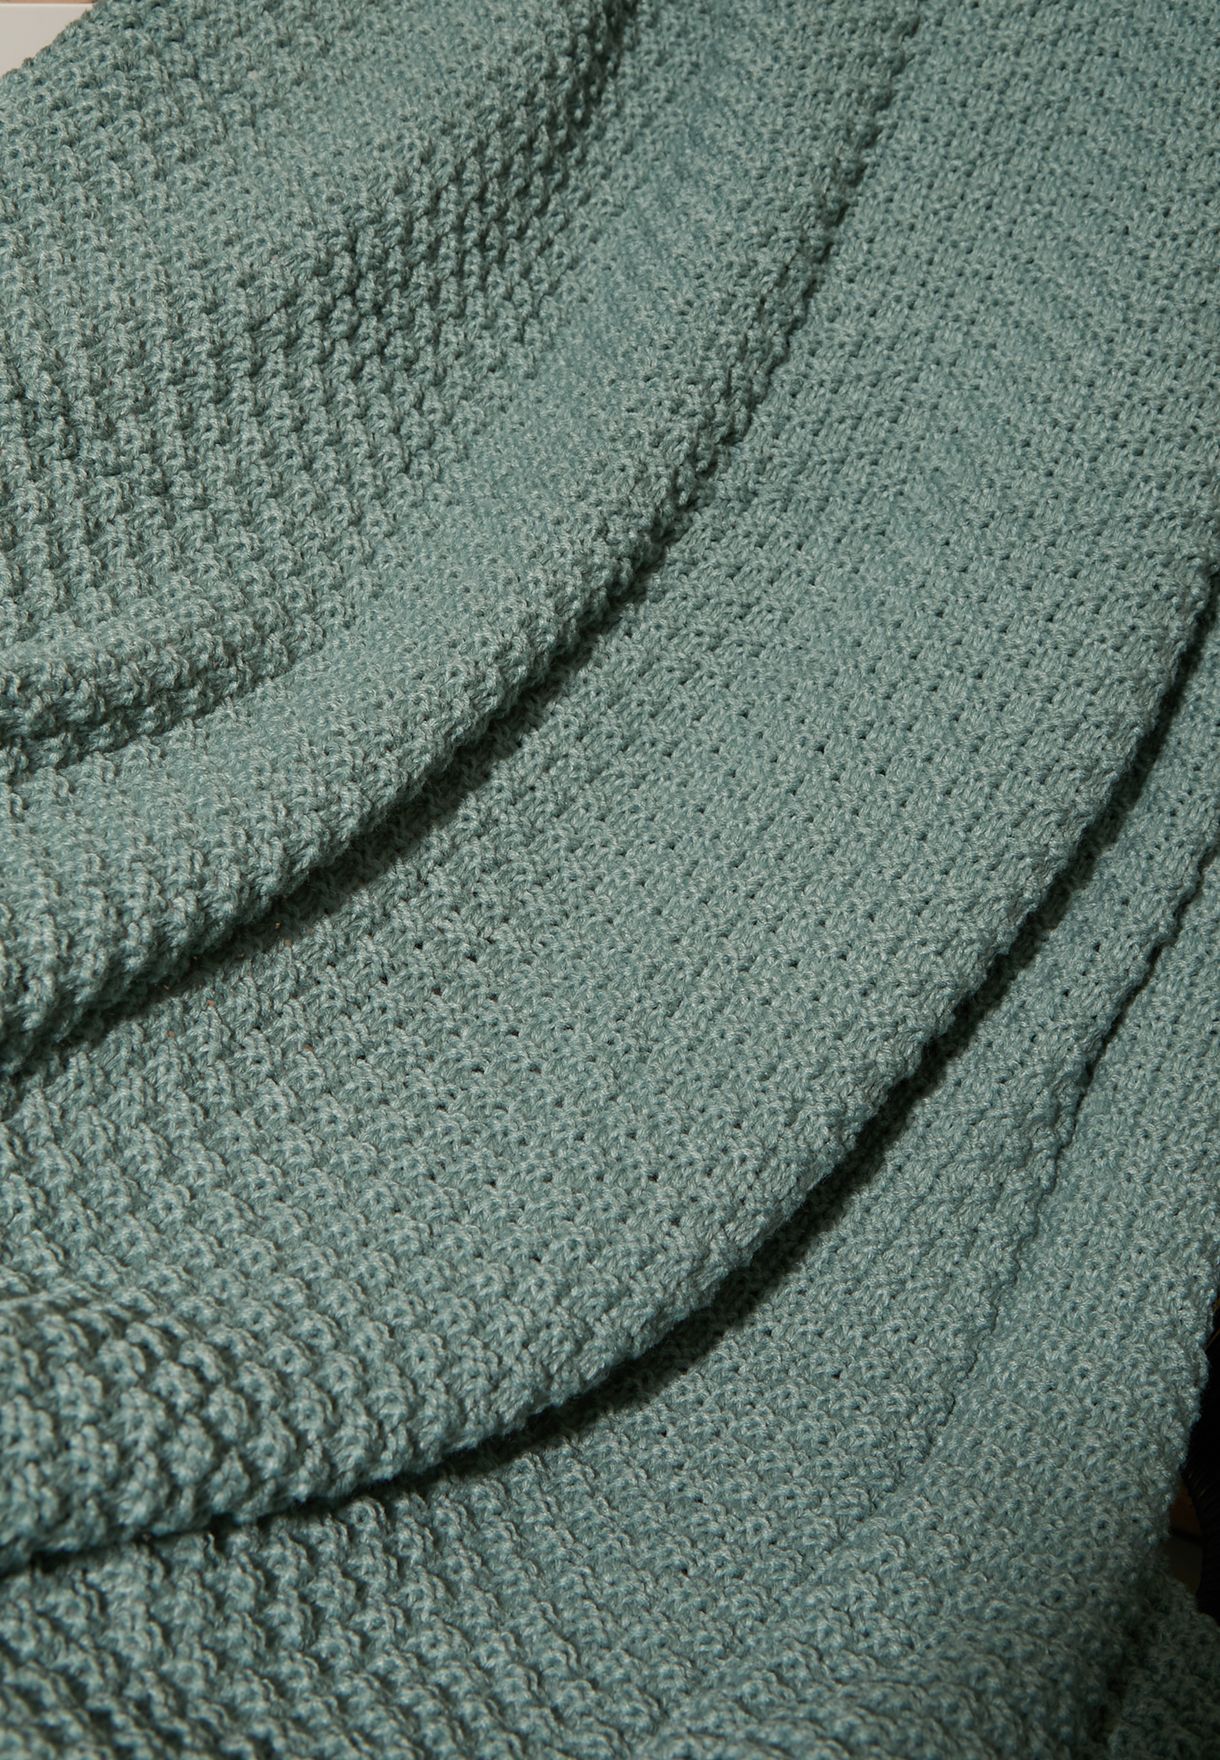 Teal Knitted Blanket 130 X 170Cm